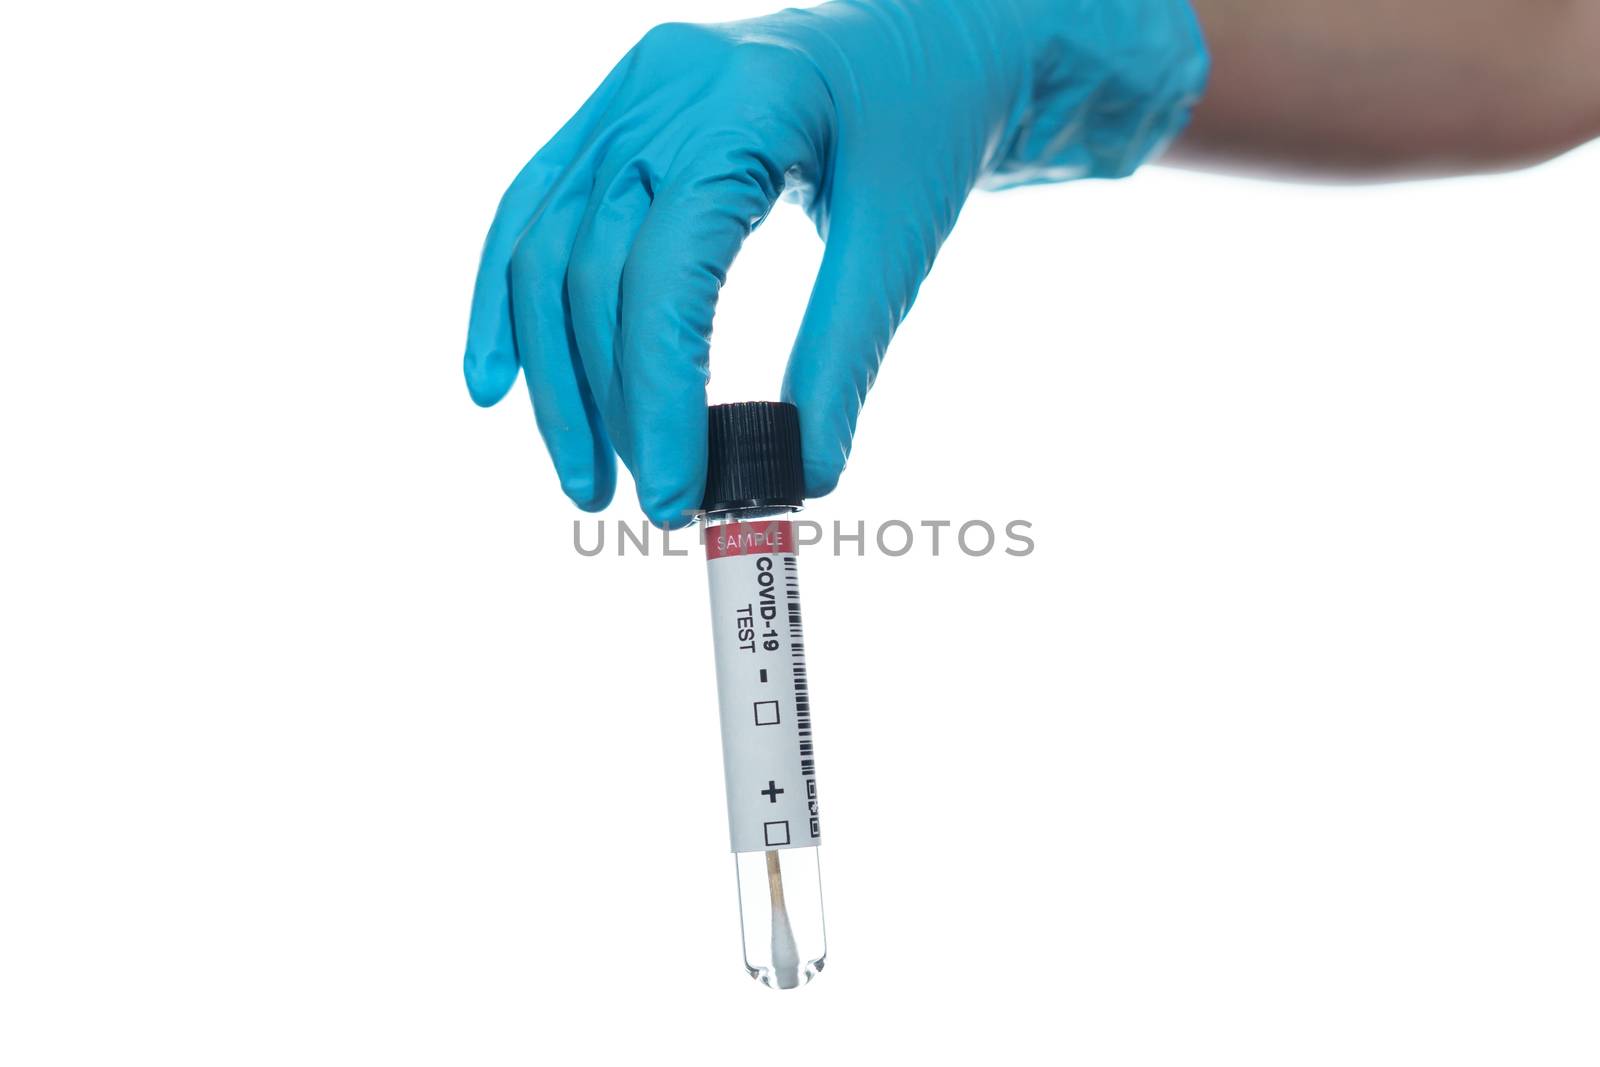 Woman hand wearing a blue rubber medical glove and hold COVID-19 swab collection kit on white isolated background.